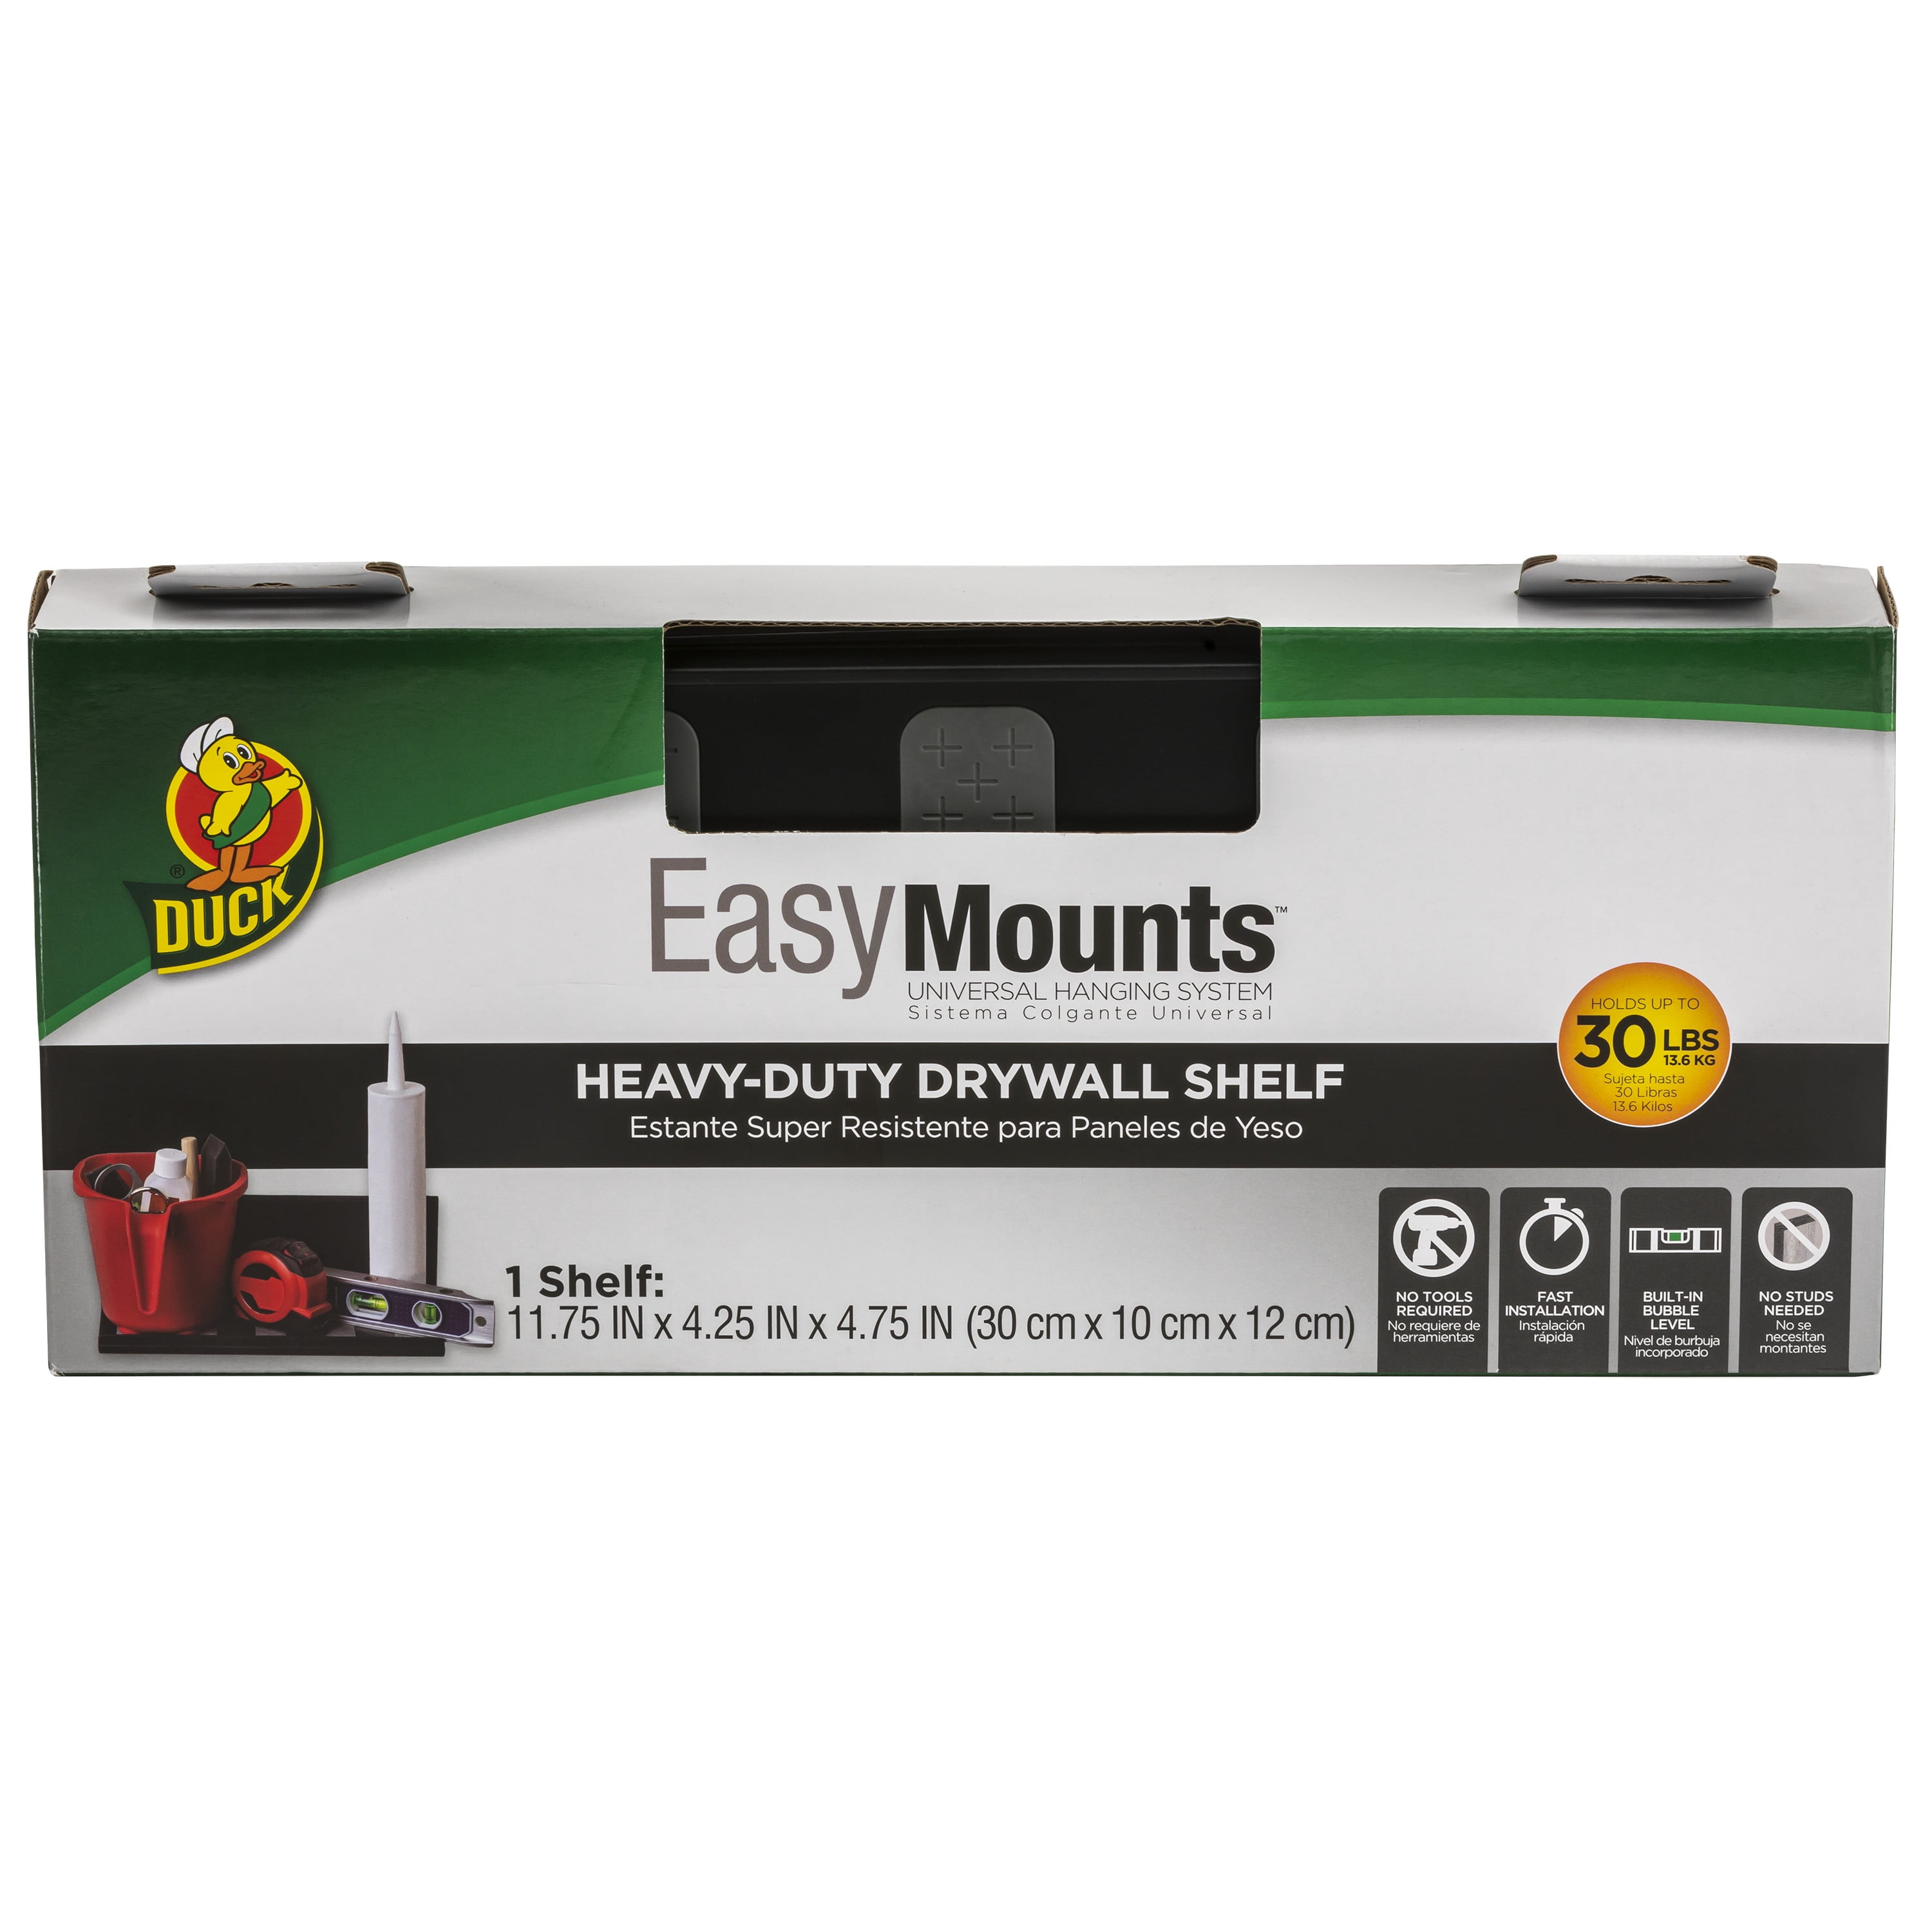 Duck EasyMounts Black Floating Garage Shelf - No Tools Required, Holds up to 30 lbs